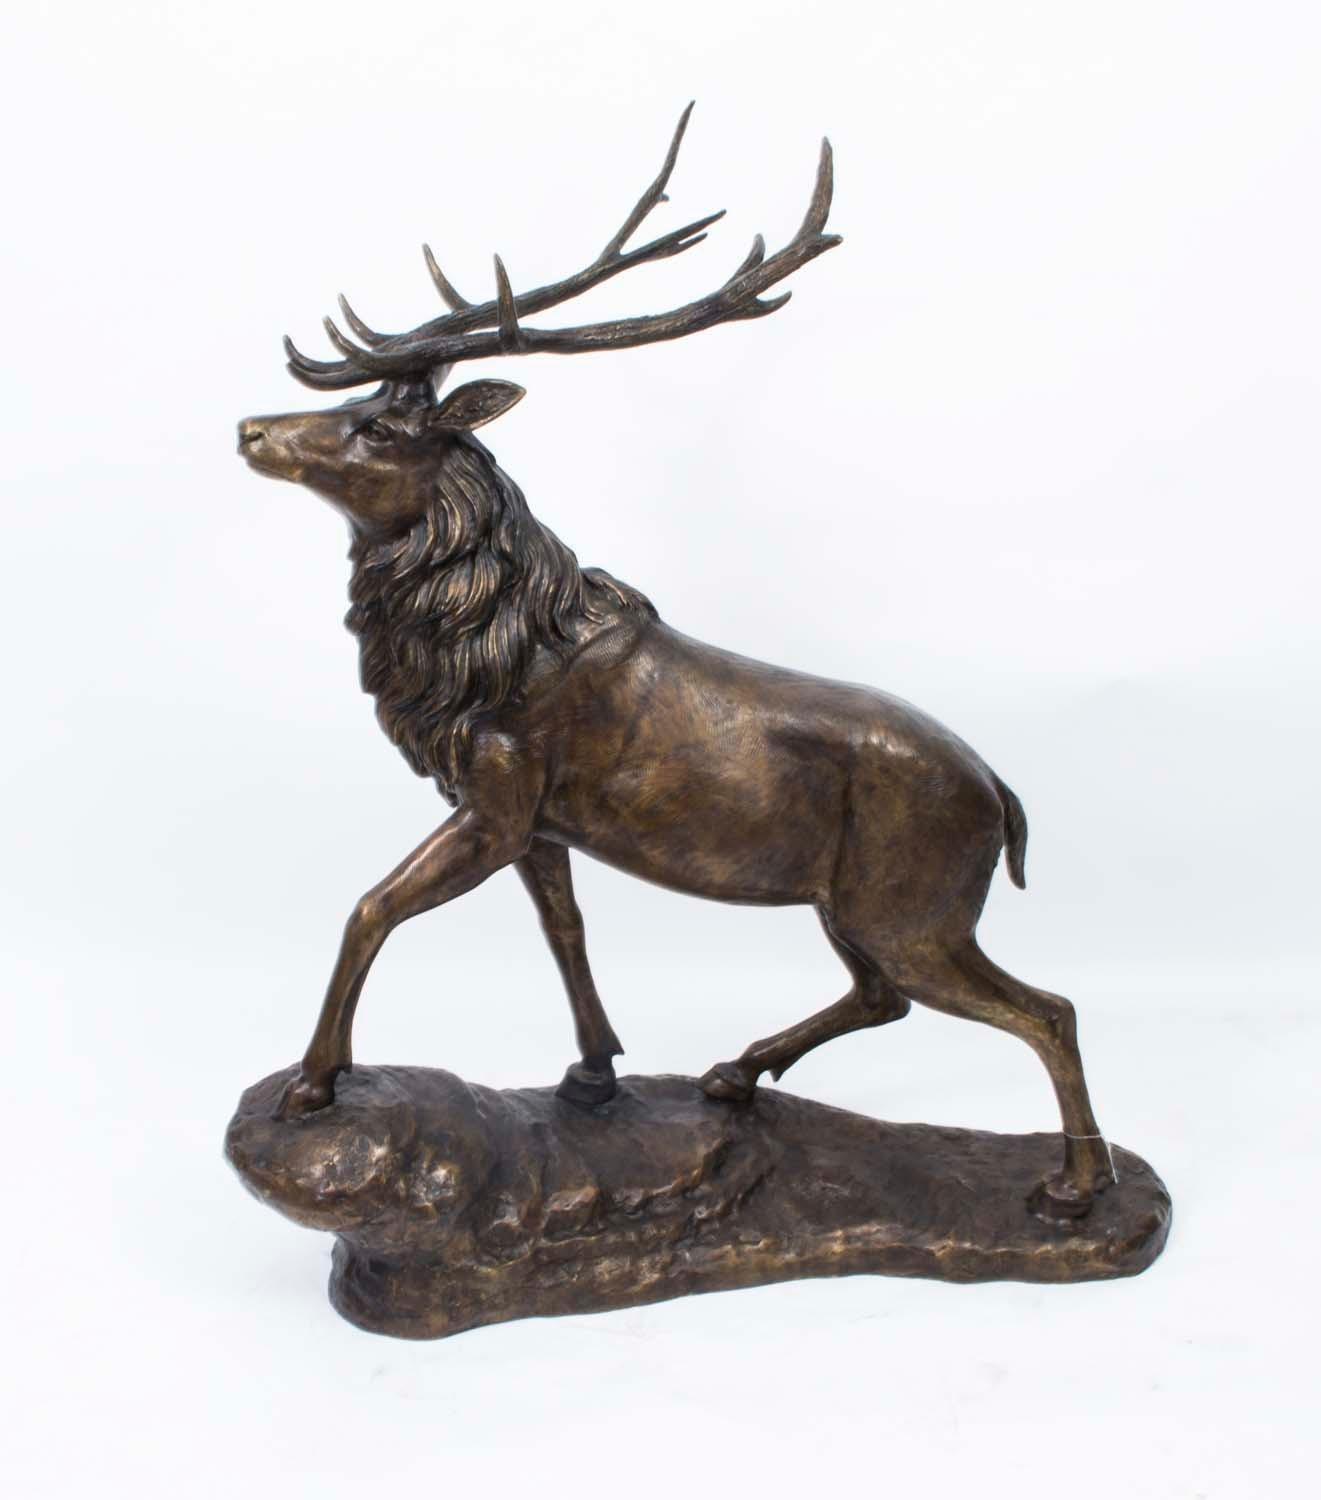 This is a very lifelike monumental bronze sculpture of a proud stag, standing on a mountain sloped base, dating from the last quarter of the 20th century.

He has a dark brown patina with detailed textured hair and horns.

There is no mistaking